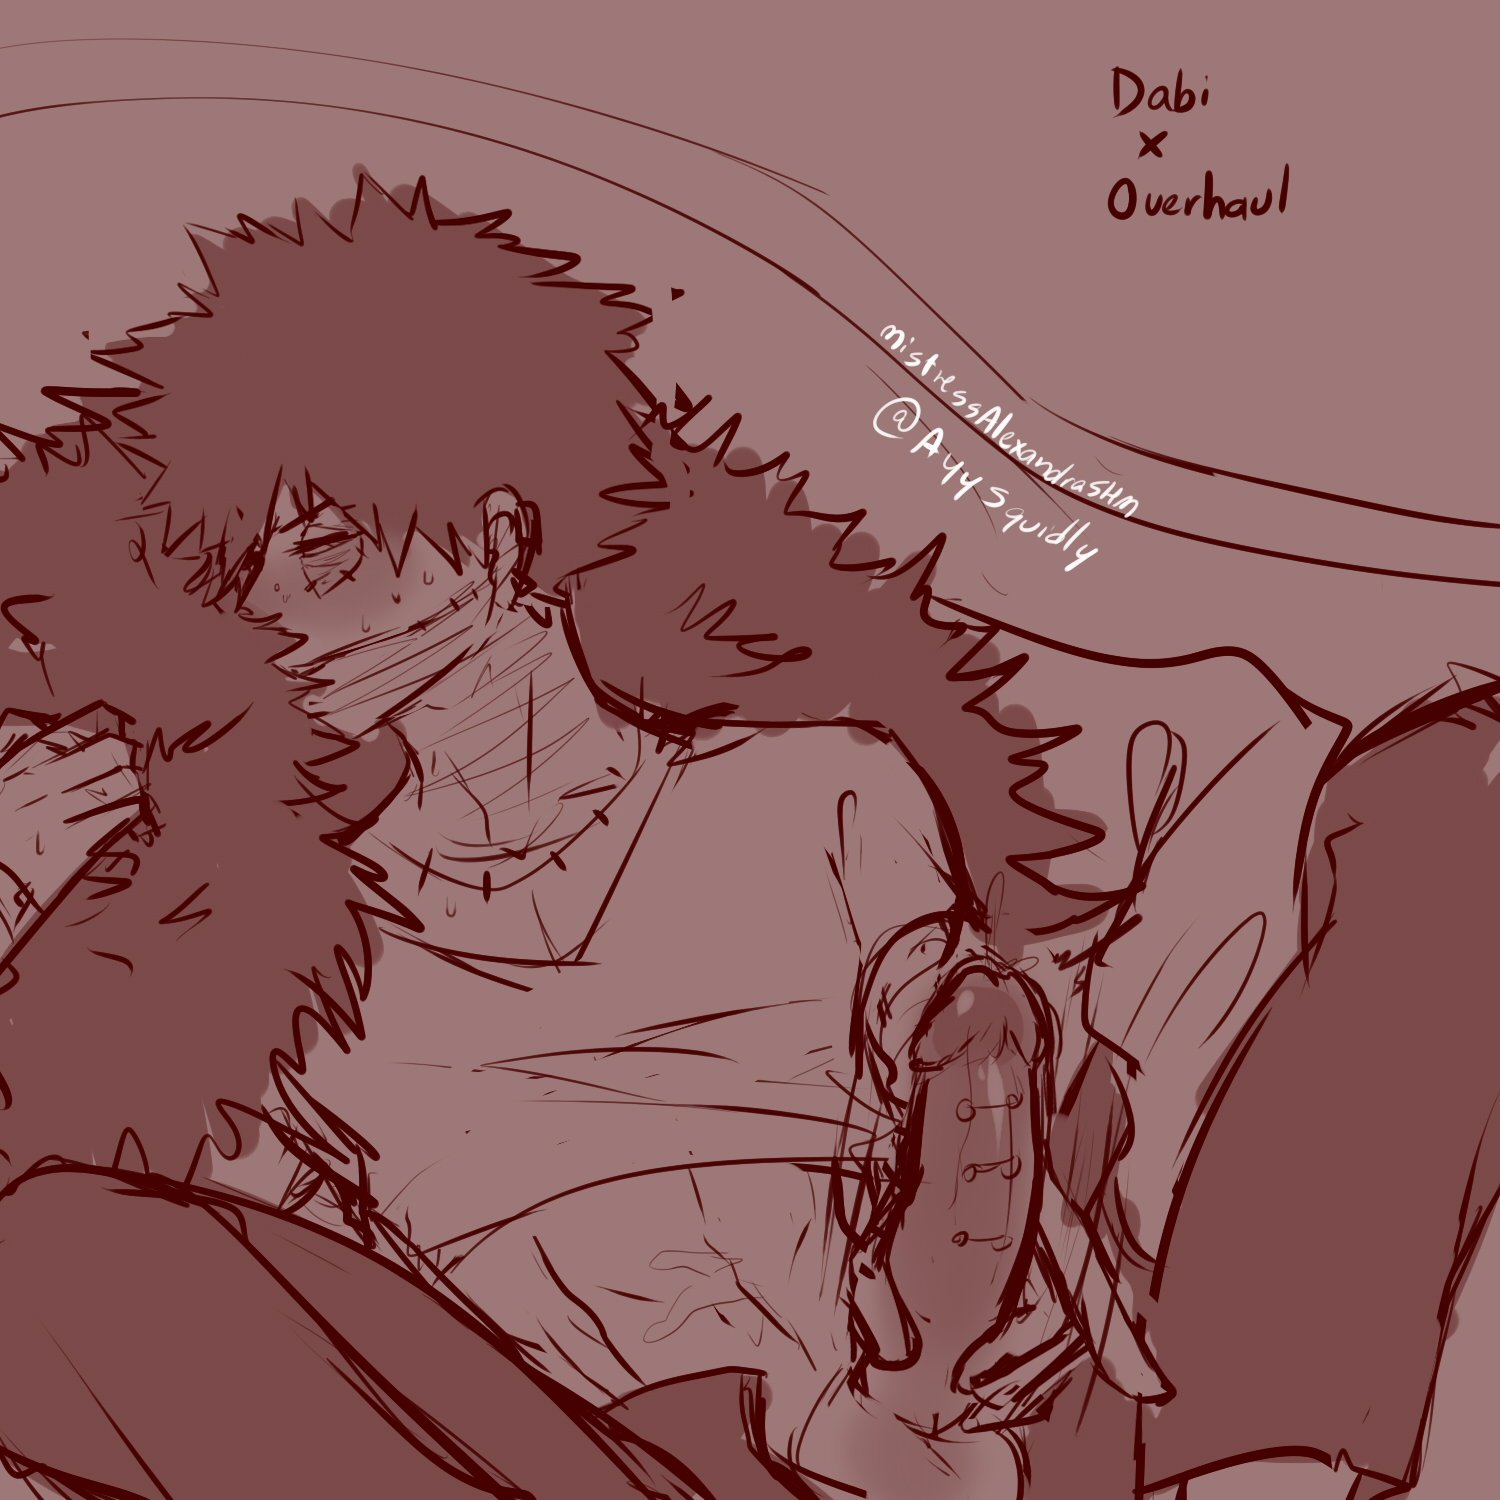 “#NSFW #Dabi #Overhaul Prompted by @_hypostasis Dabi furiously jerking off ...